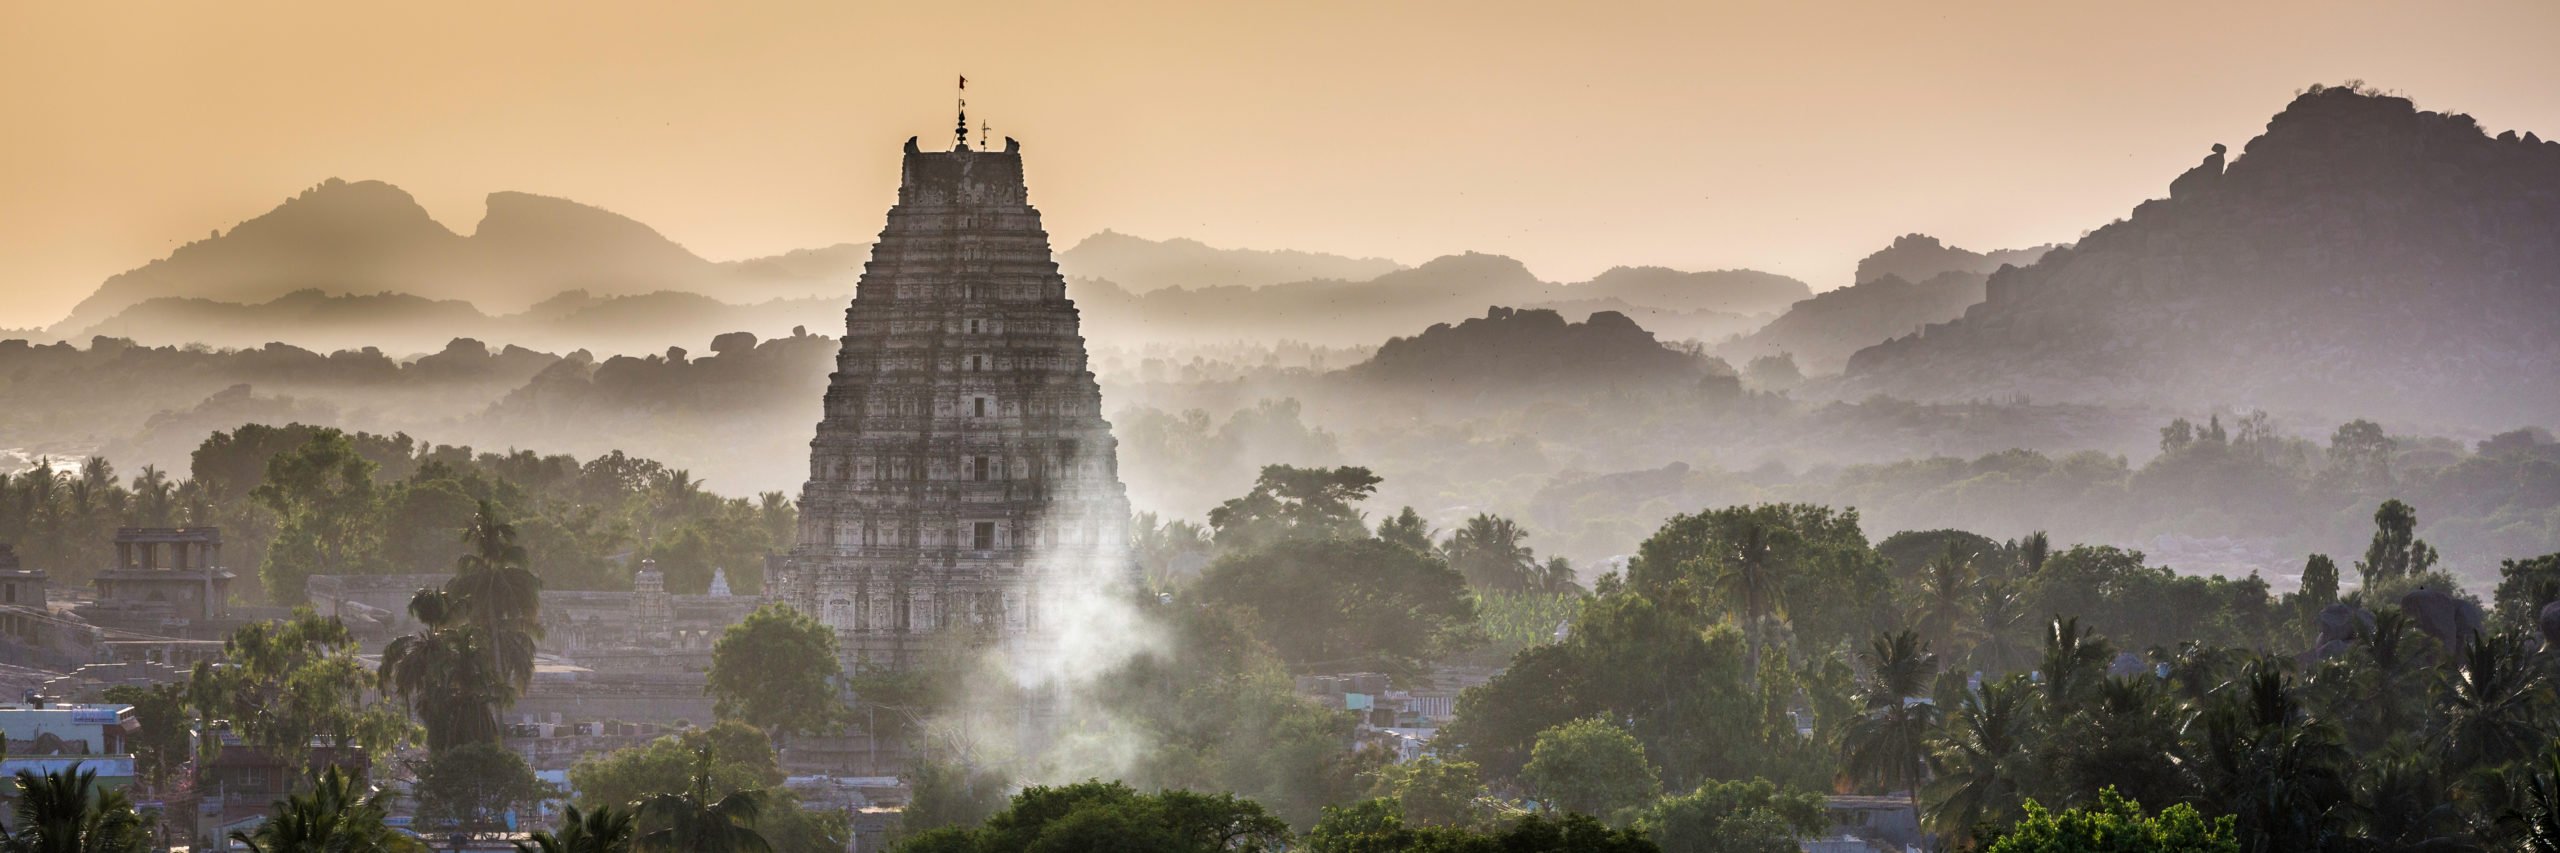 Explore Lakes, Canals And Cave Paintings In Our Bewitching Ruins Of Hampi And Badami Tour